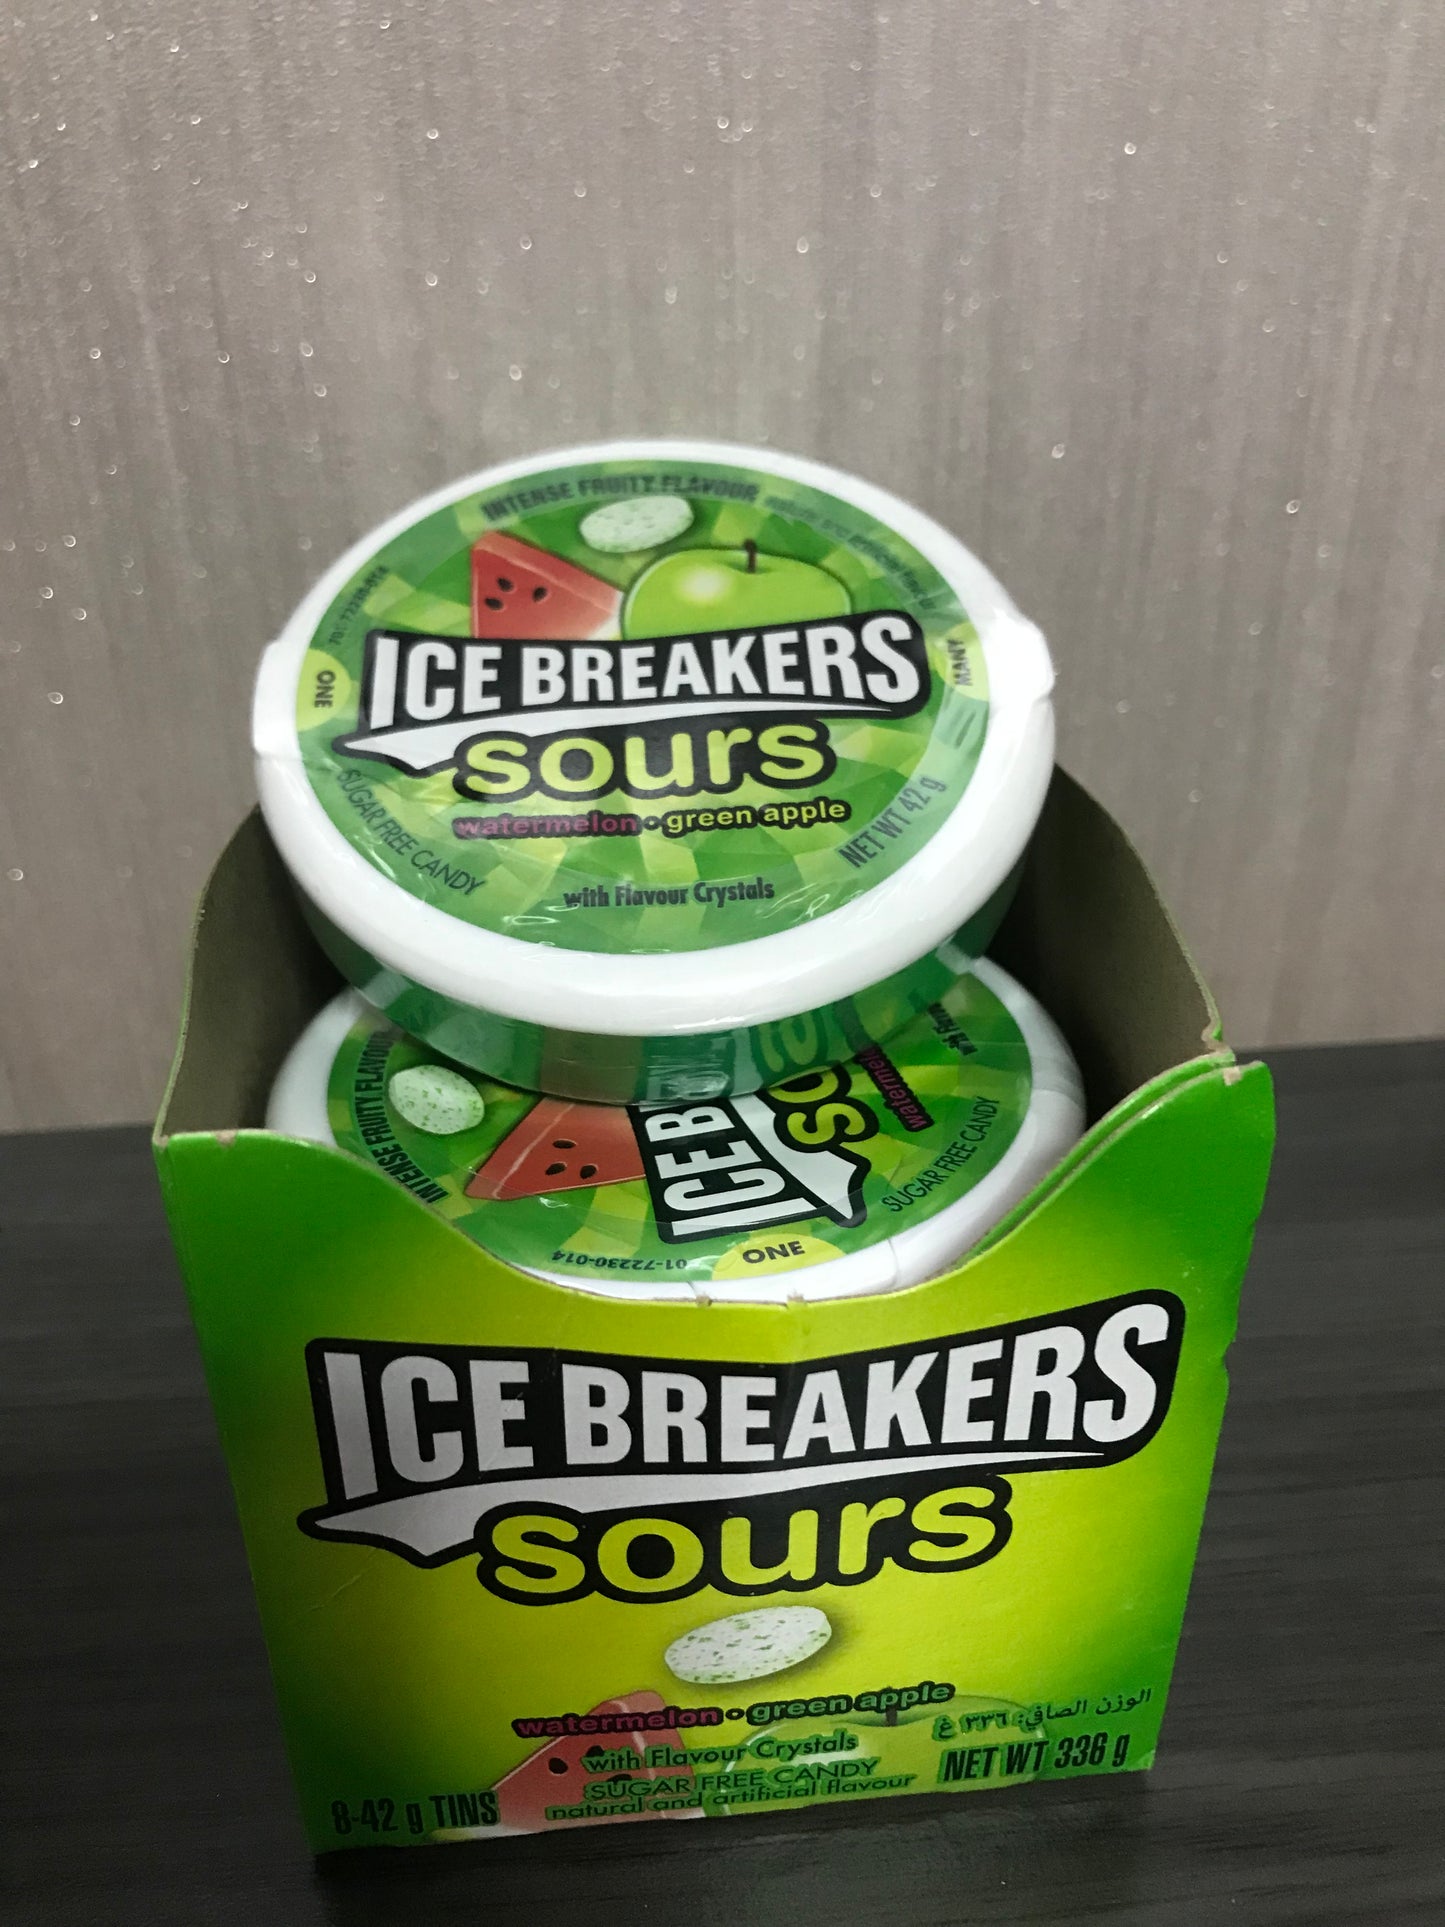 Icy breakers (sour) watermelon and green apple